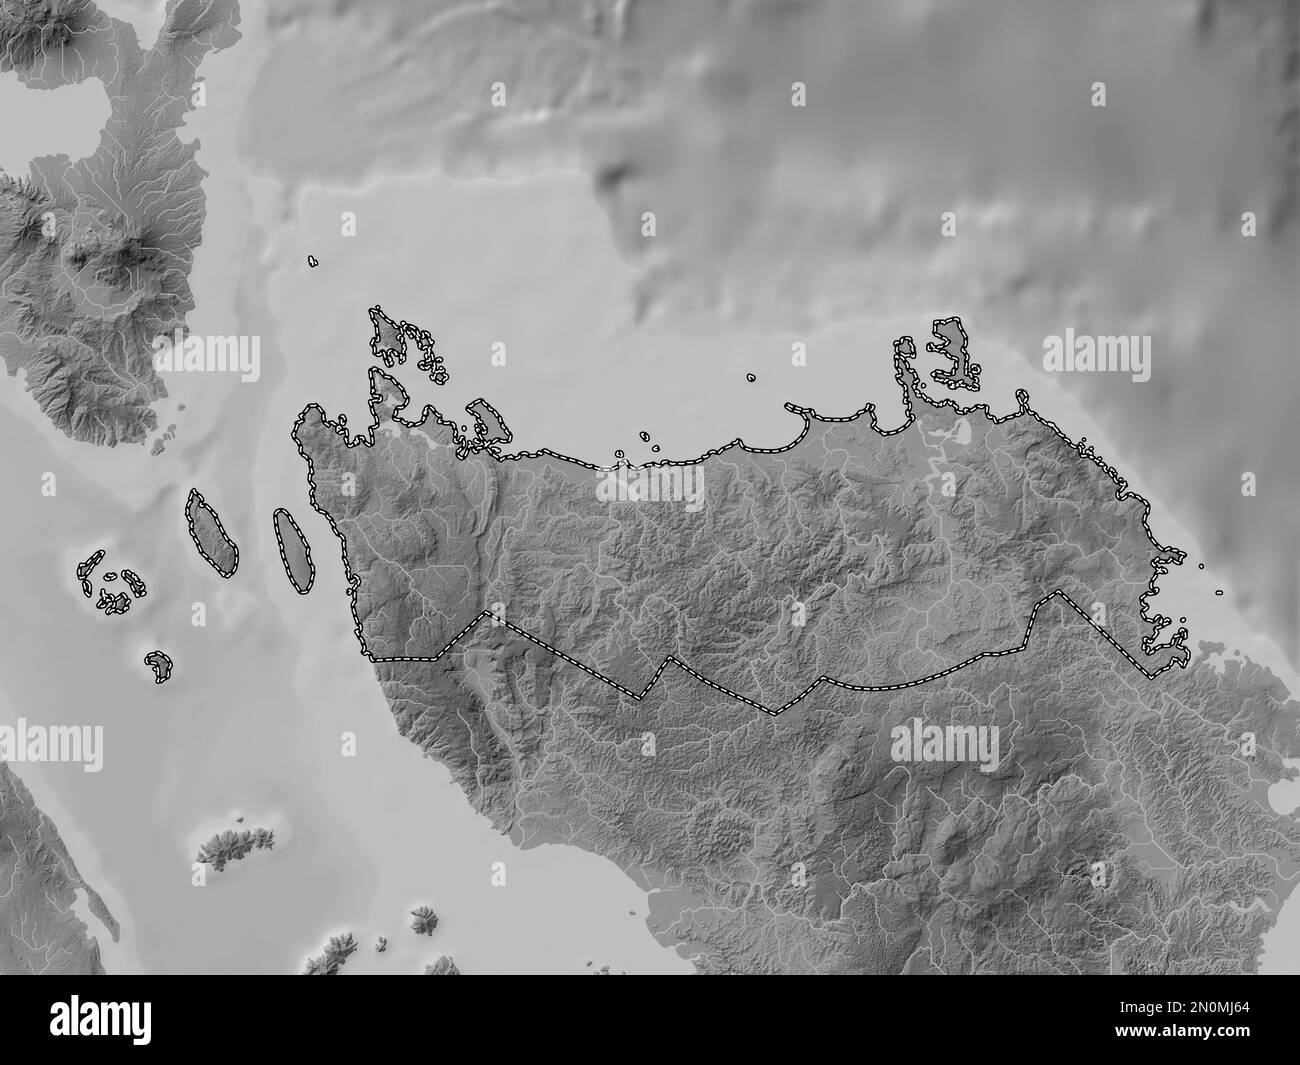 Northern Samar, province of Philippines. Grayscale elevation map with lakes and rivers Stock Photo